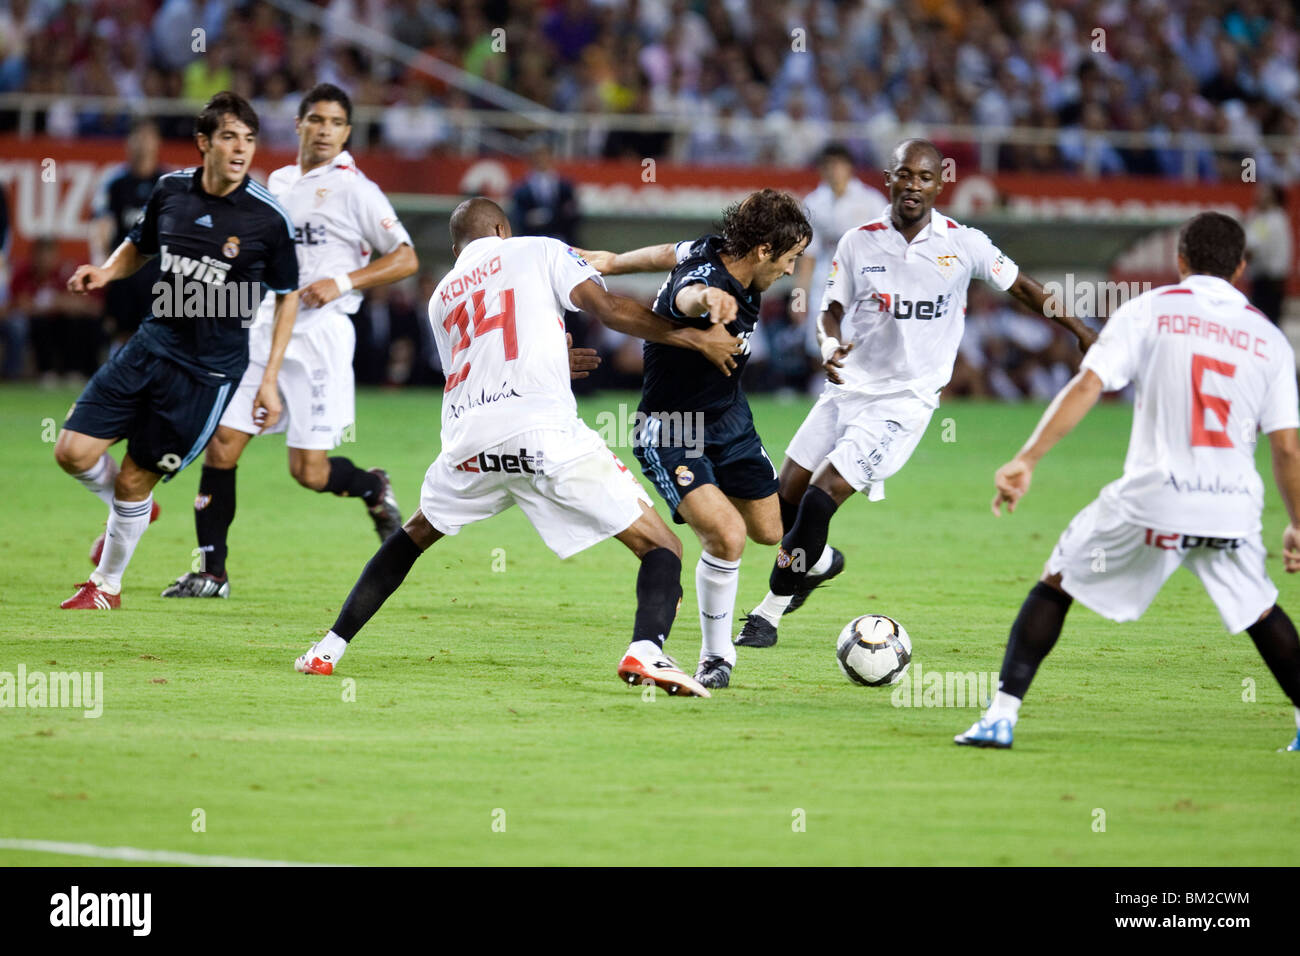 Raul surrounded by opponent players. Stock Photo